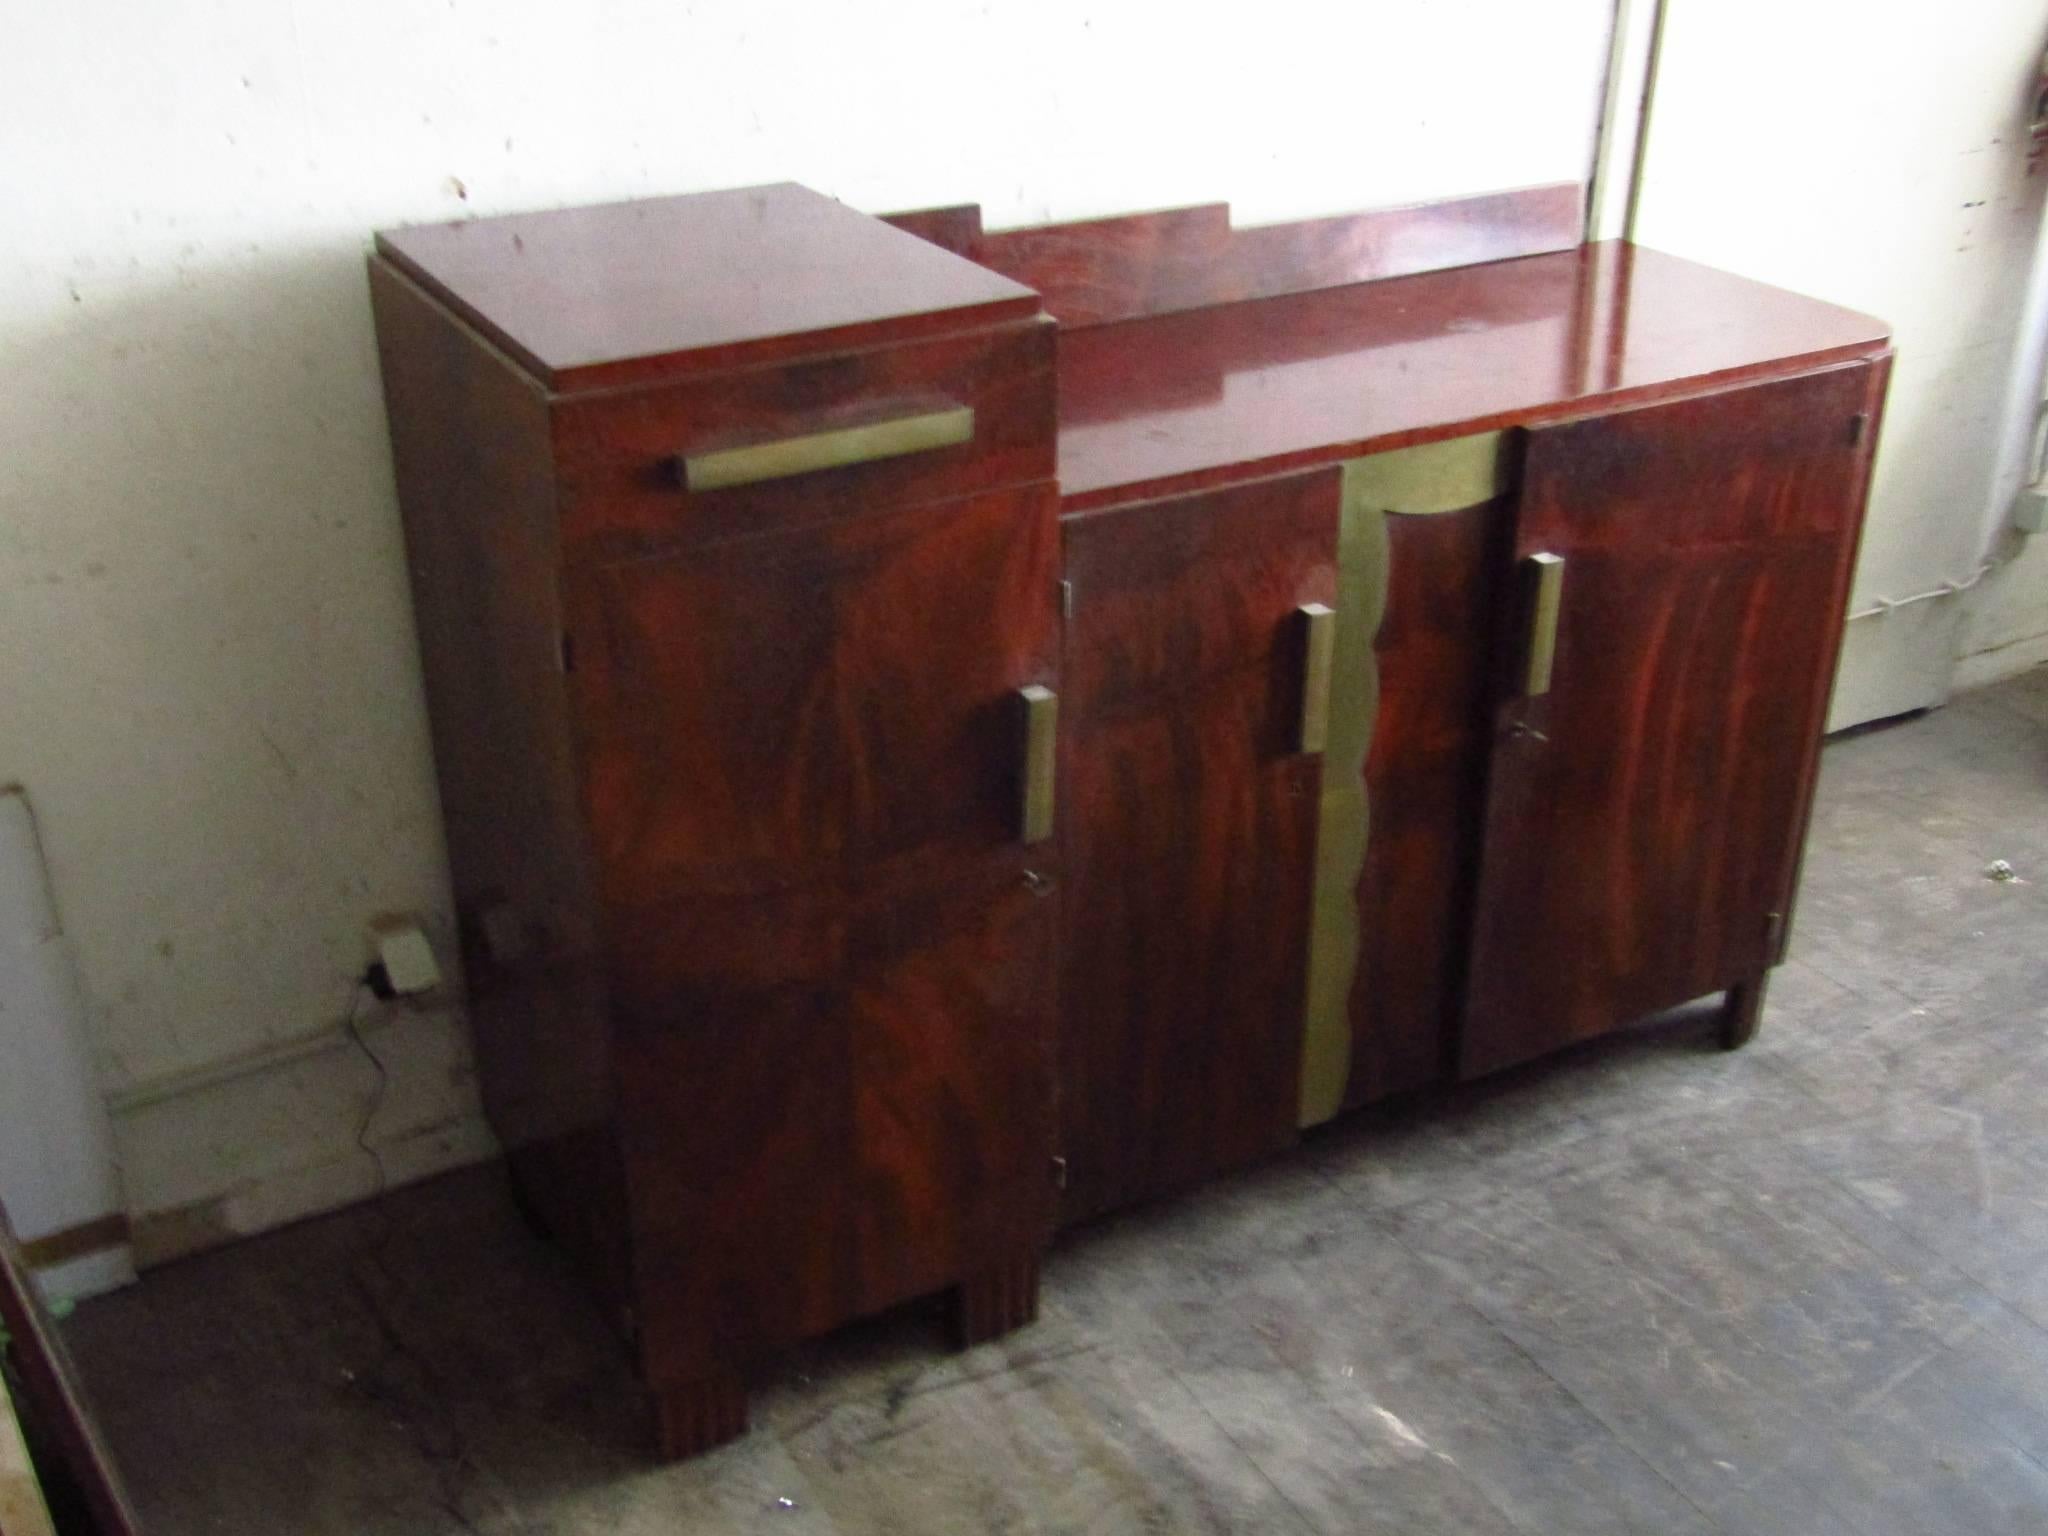 Mahogany Art Deco sideboard, France, 1935. Bronze details.
Unrestored original condition, needs new surface.

*** We offer door to door shipping. Please ask for your quote! ***
 